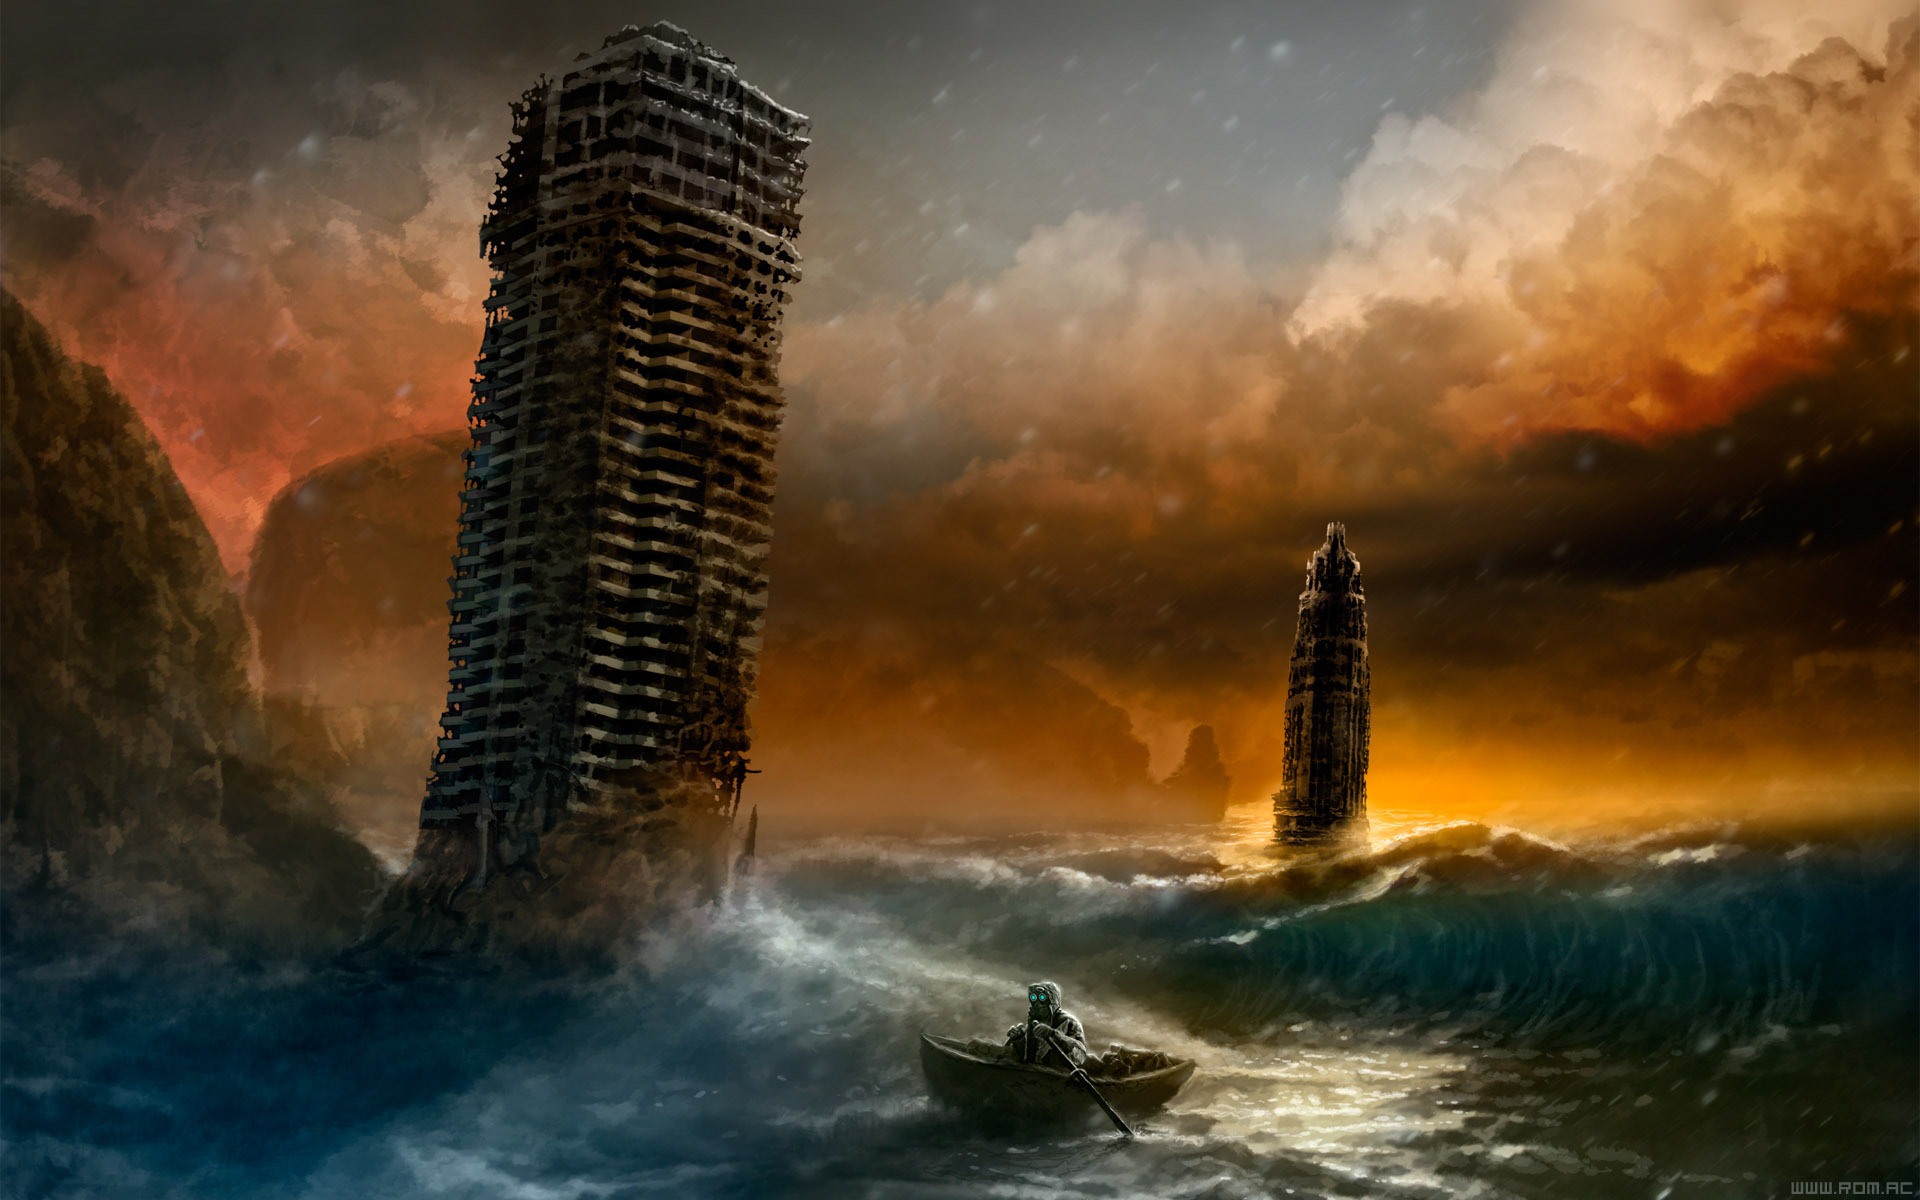 Romantically Apocalyptic creative painting wallpapers (1) #8 - 1920x1200